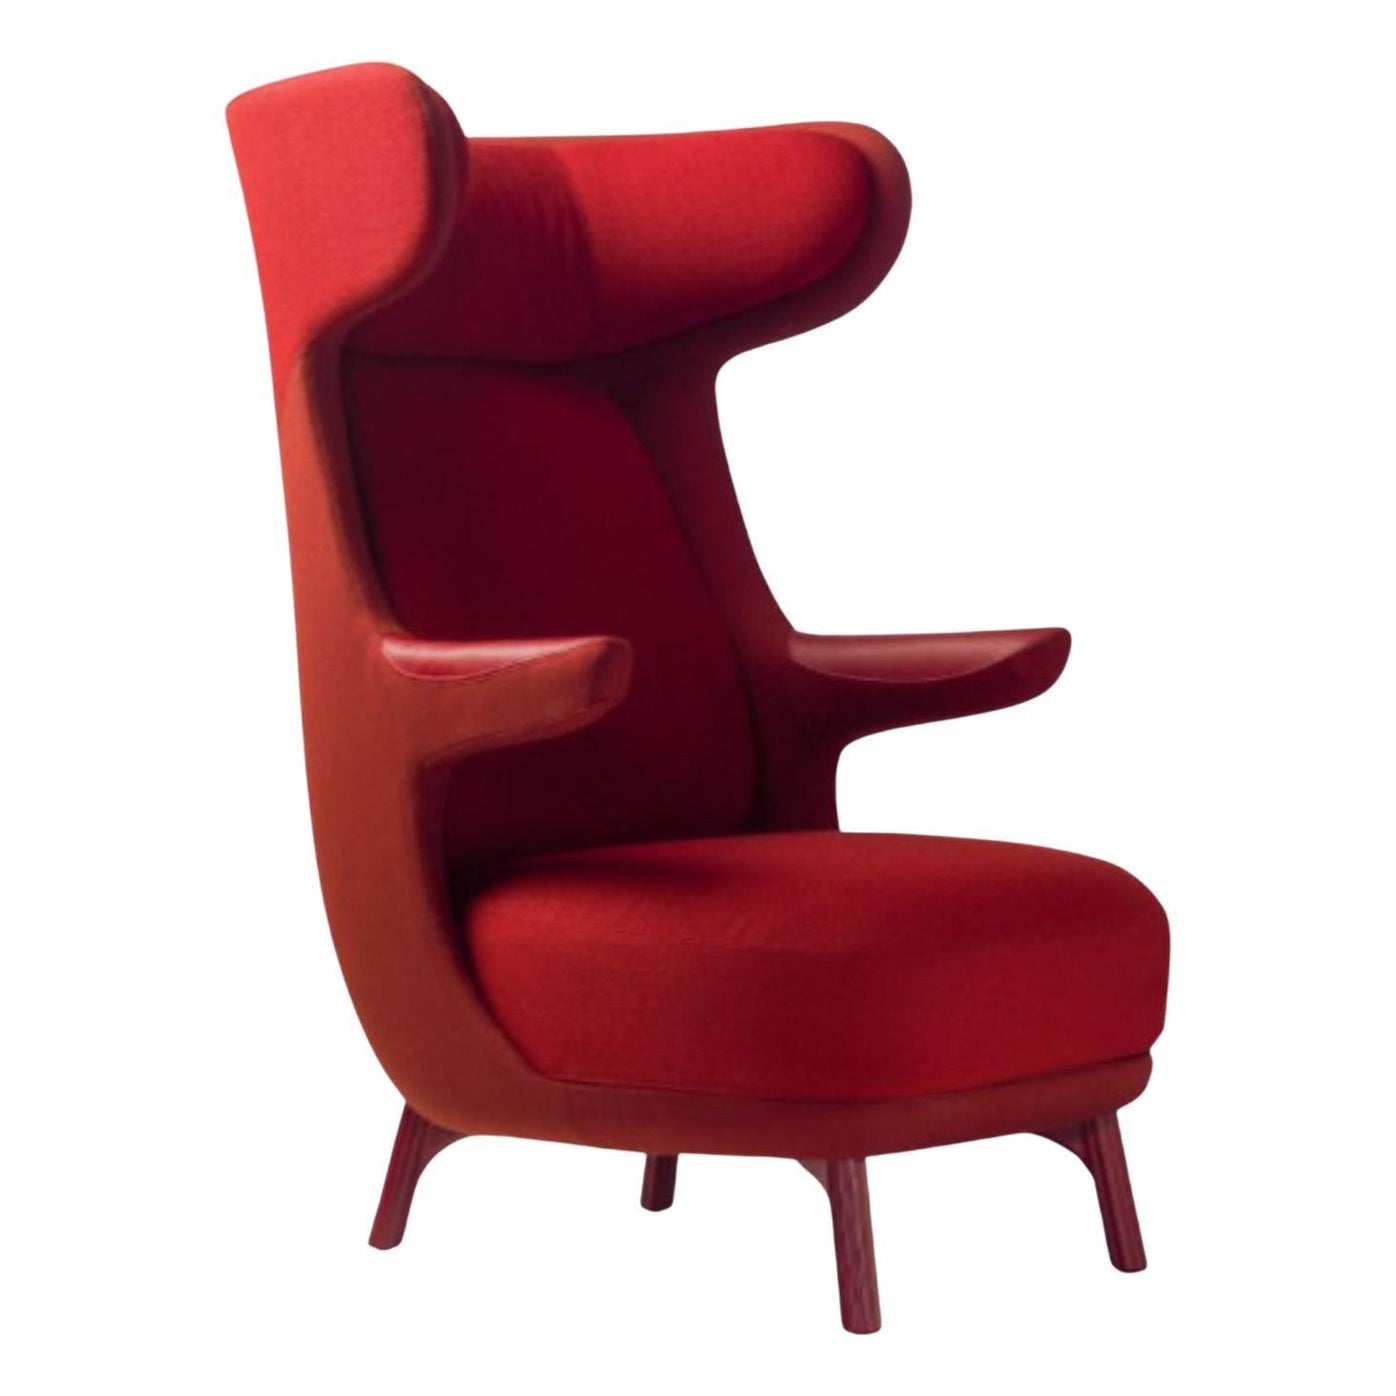 Dino Hayon Edition Red Armchair by Jaime Hayon For Sale